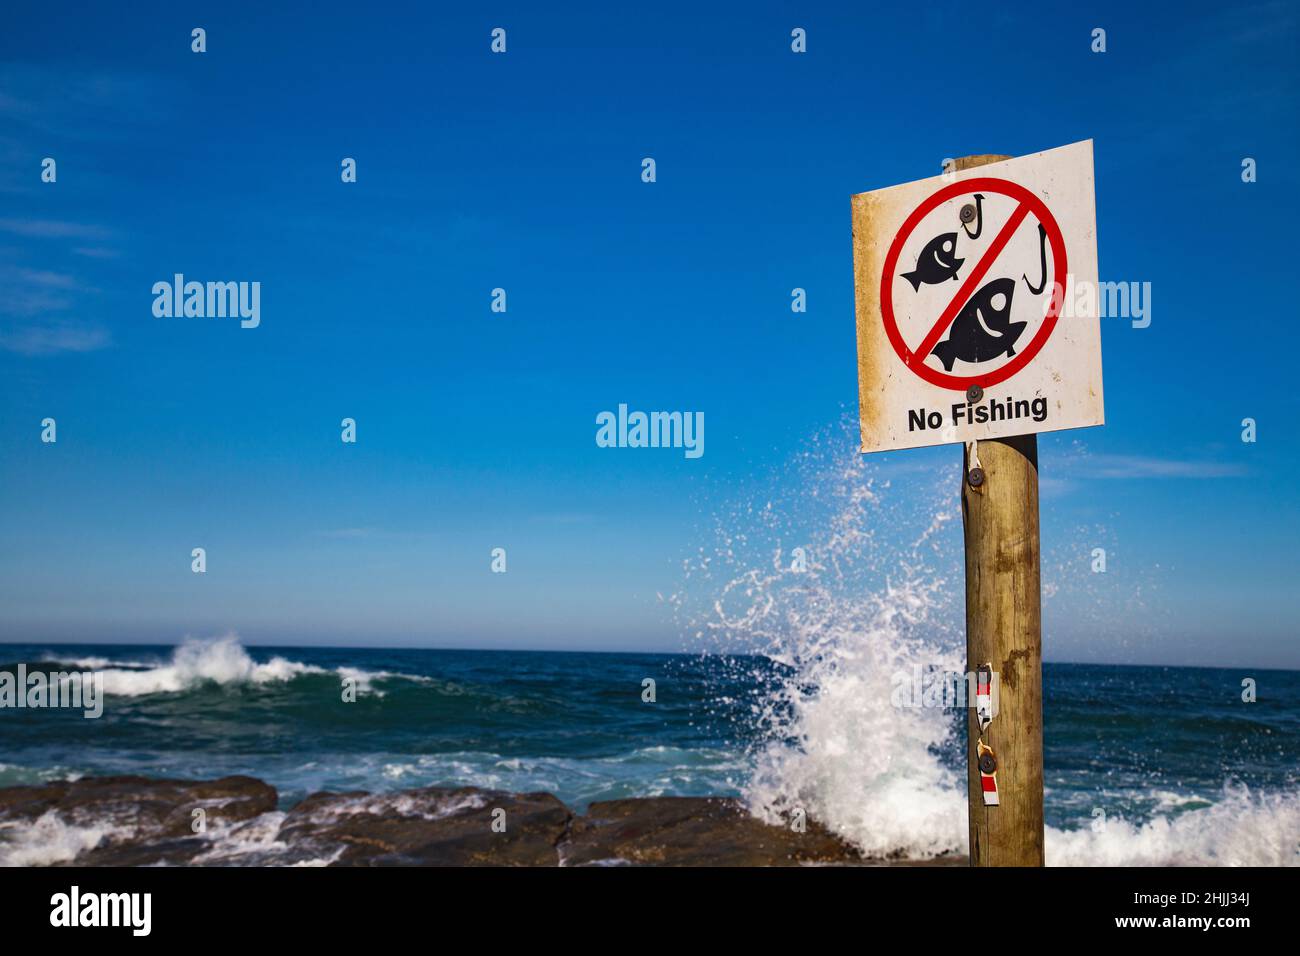 No fishing sign on a rocky outcrop in the sea. Stock Photo